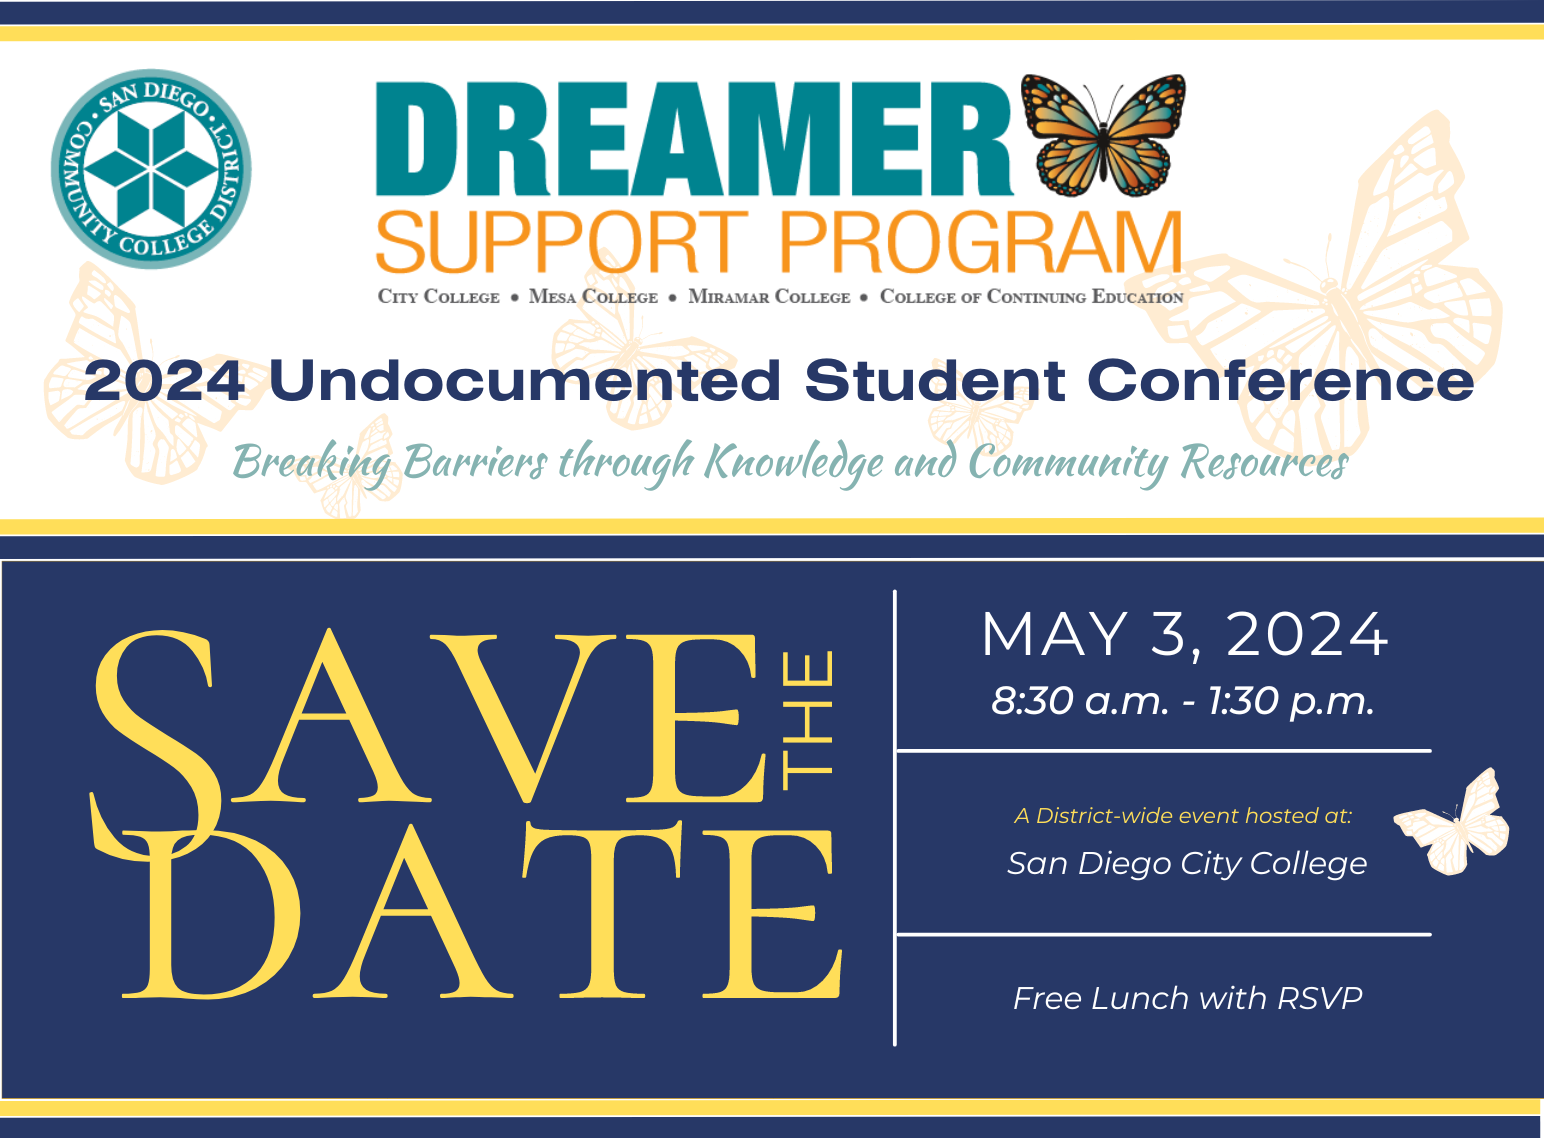 A save-the-date announcement for the SDCCD Dreamers Conference: Breaking barriers through knowledge and community resources. Date: May 3, 2024. Time: 8:30 am to 1:30 pm. Location: San Diego City College. Details: Free lunch with RSVP.